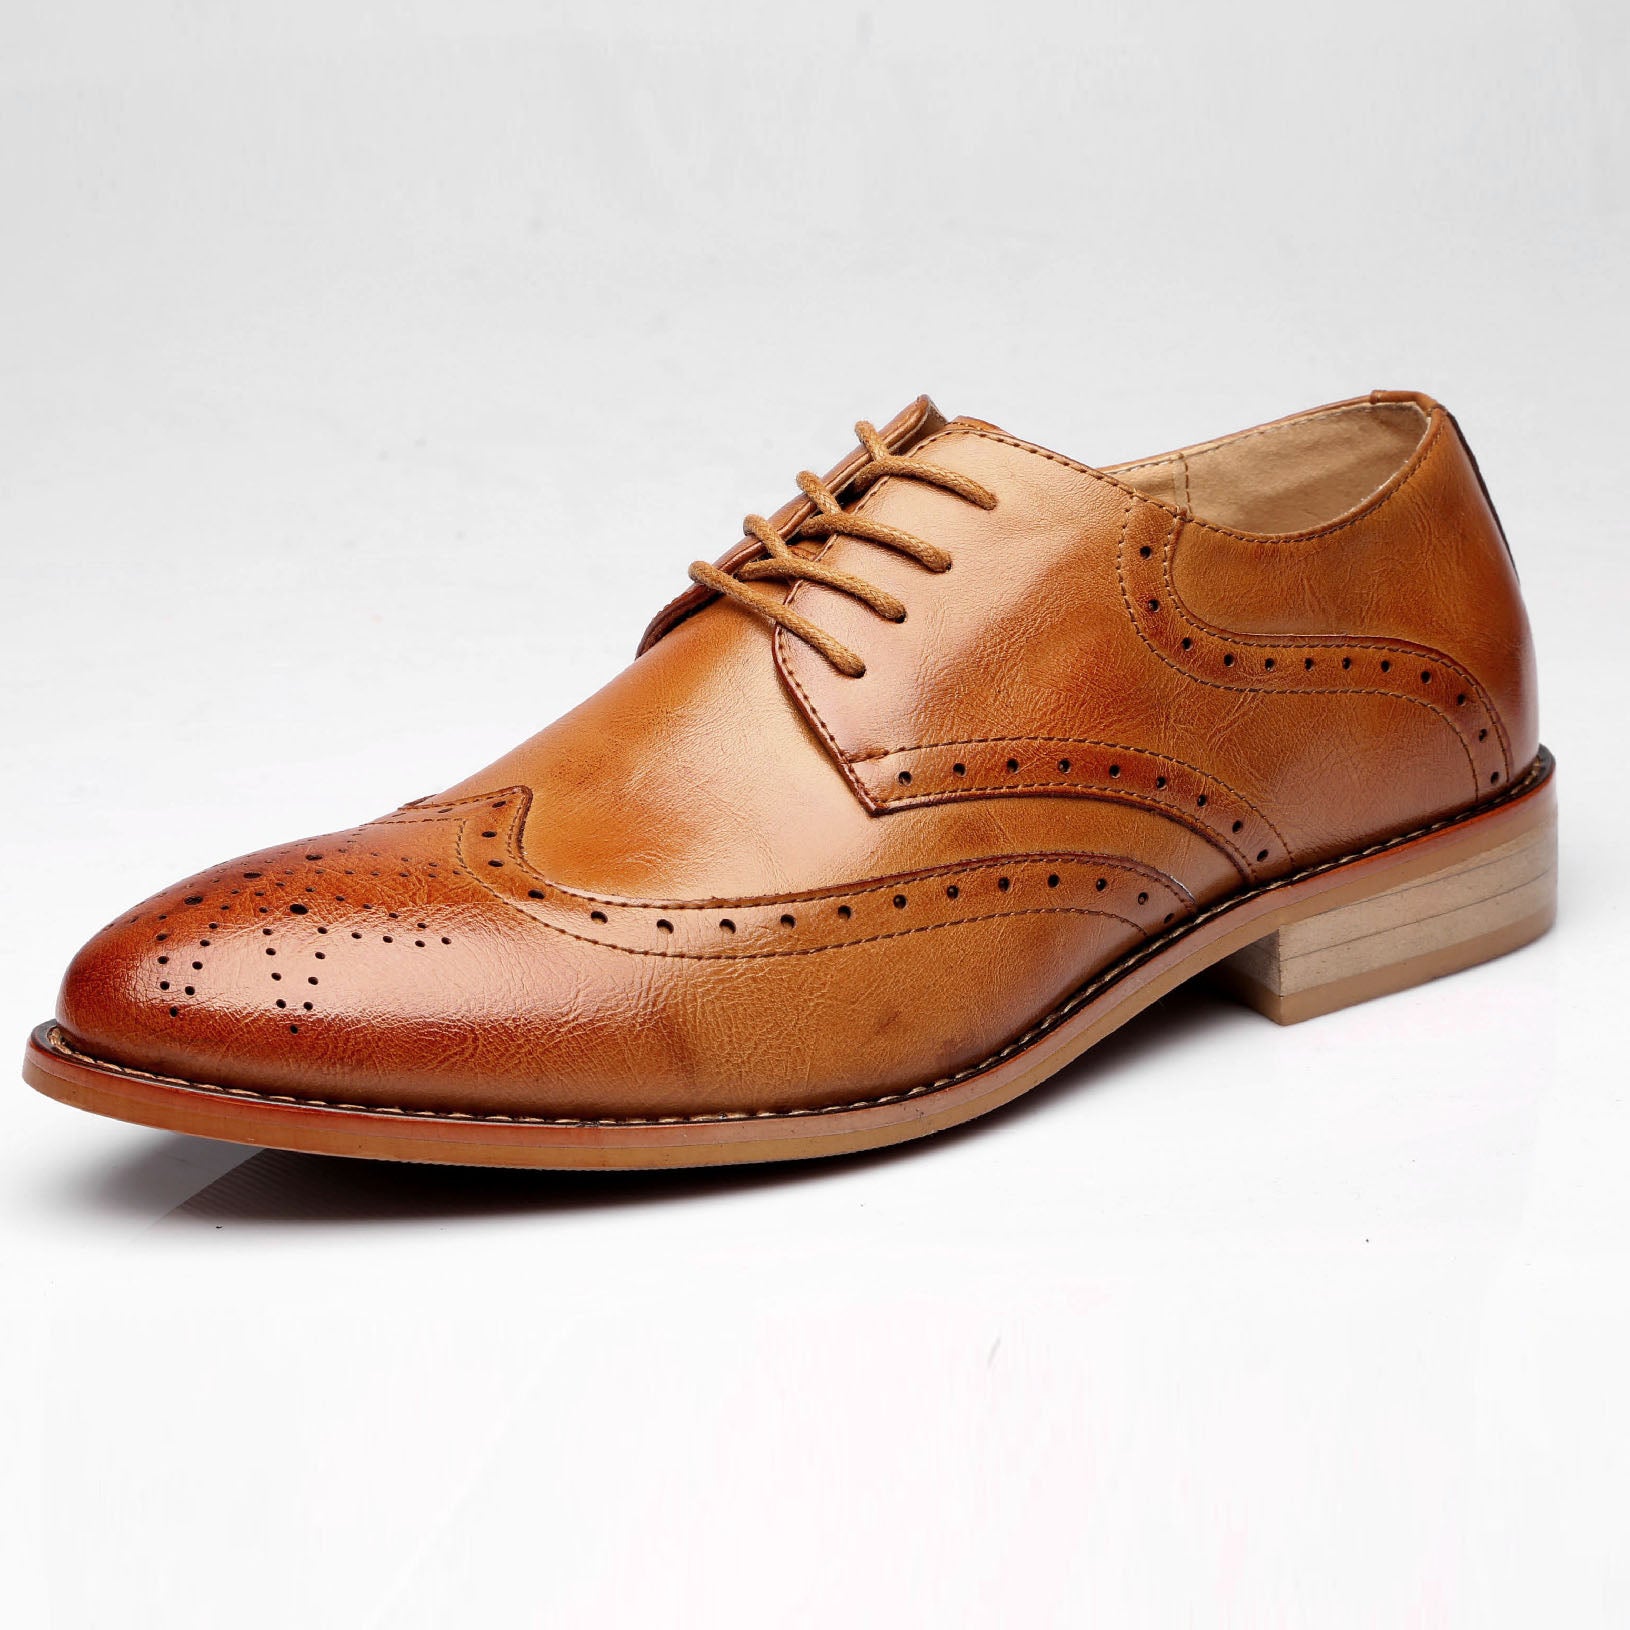 British leather shoes